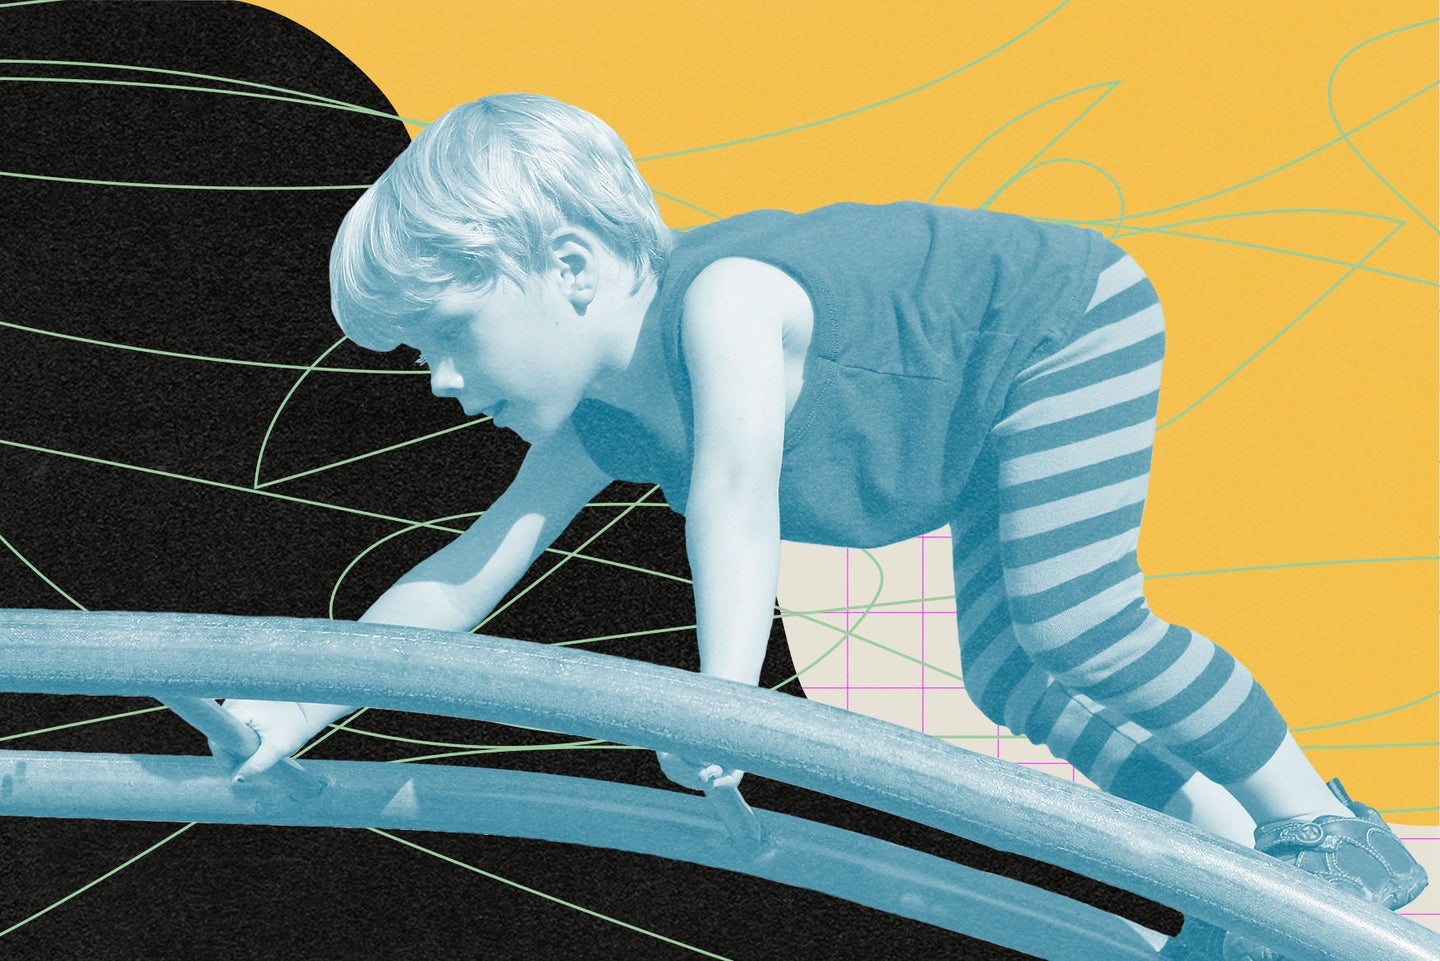 A child wearing a dark t-shirt and striped leggings climbs a playground structure. The child and structure are greyscale against a yellow, beige, black, pink, and green abstract background.